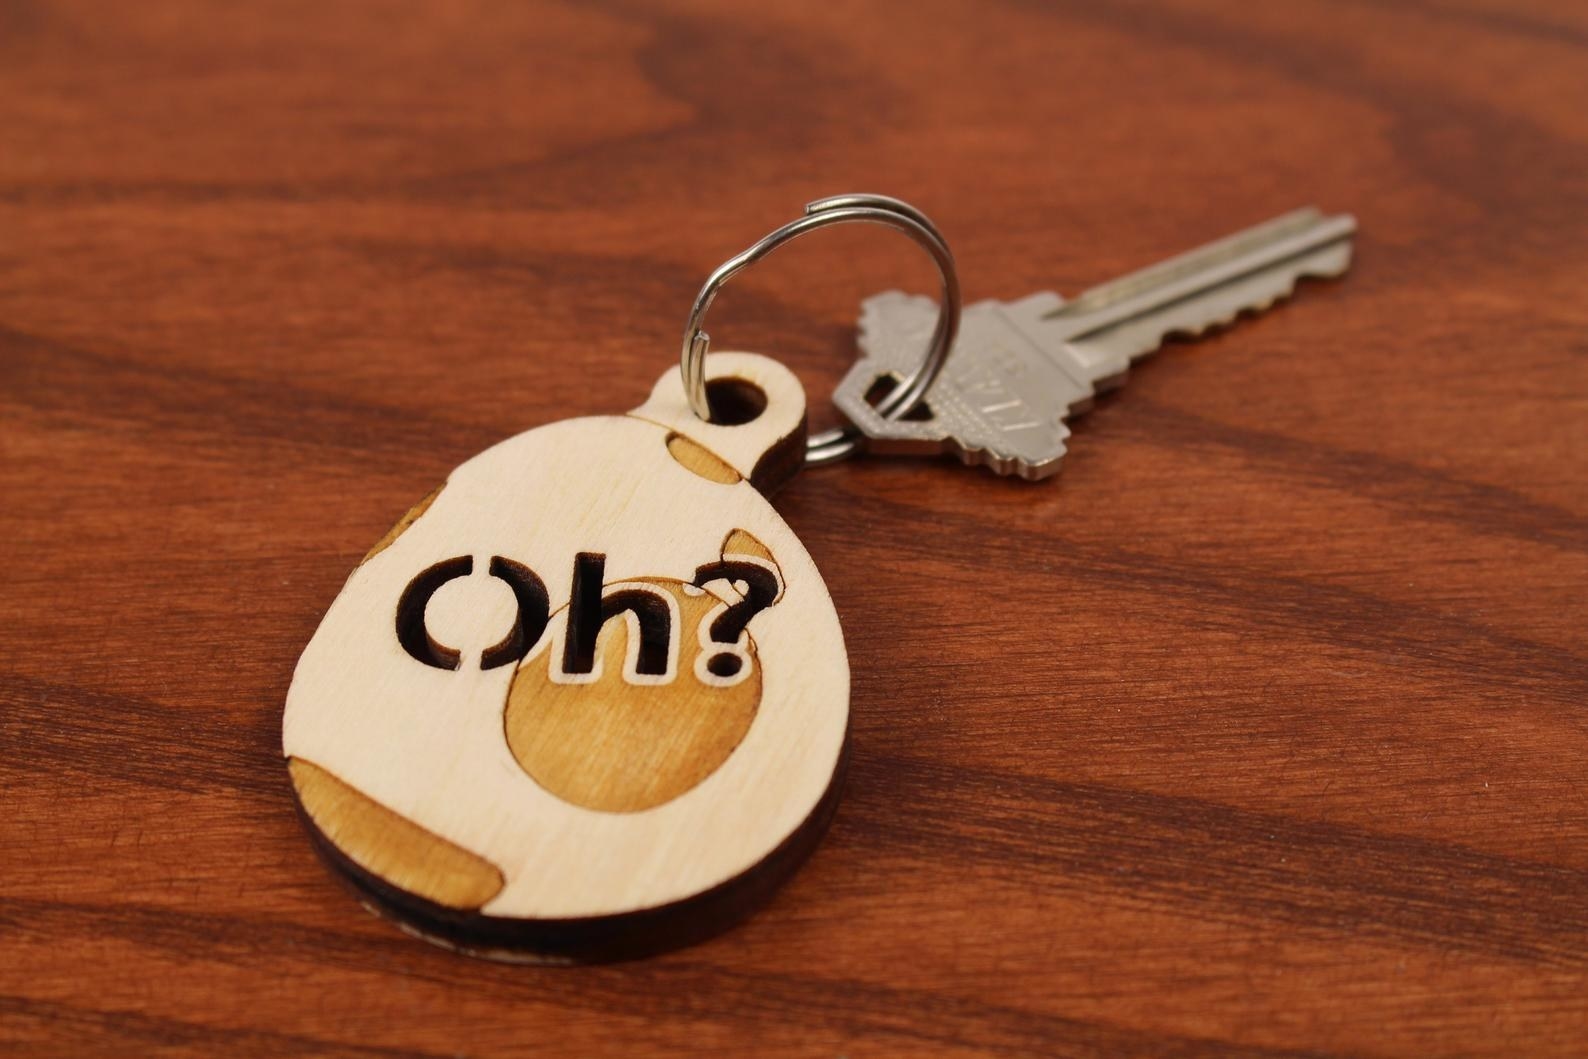 a wooden egg keychain with the word &quot;oh?&quot; etched onto it